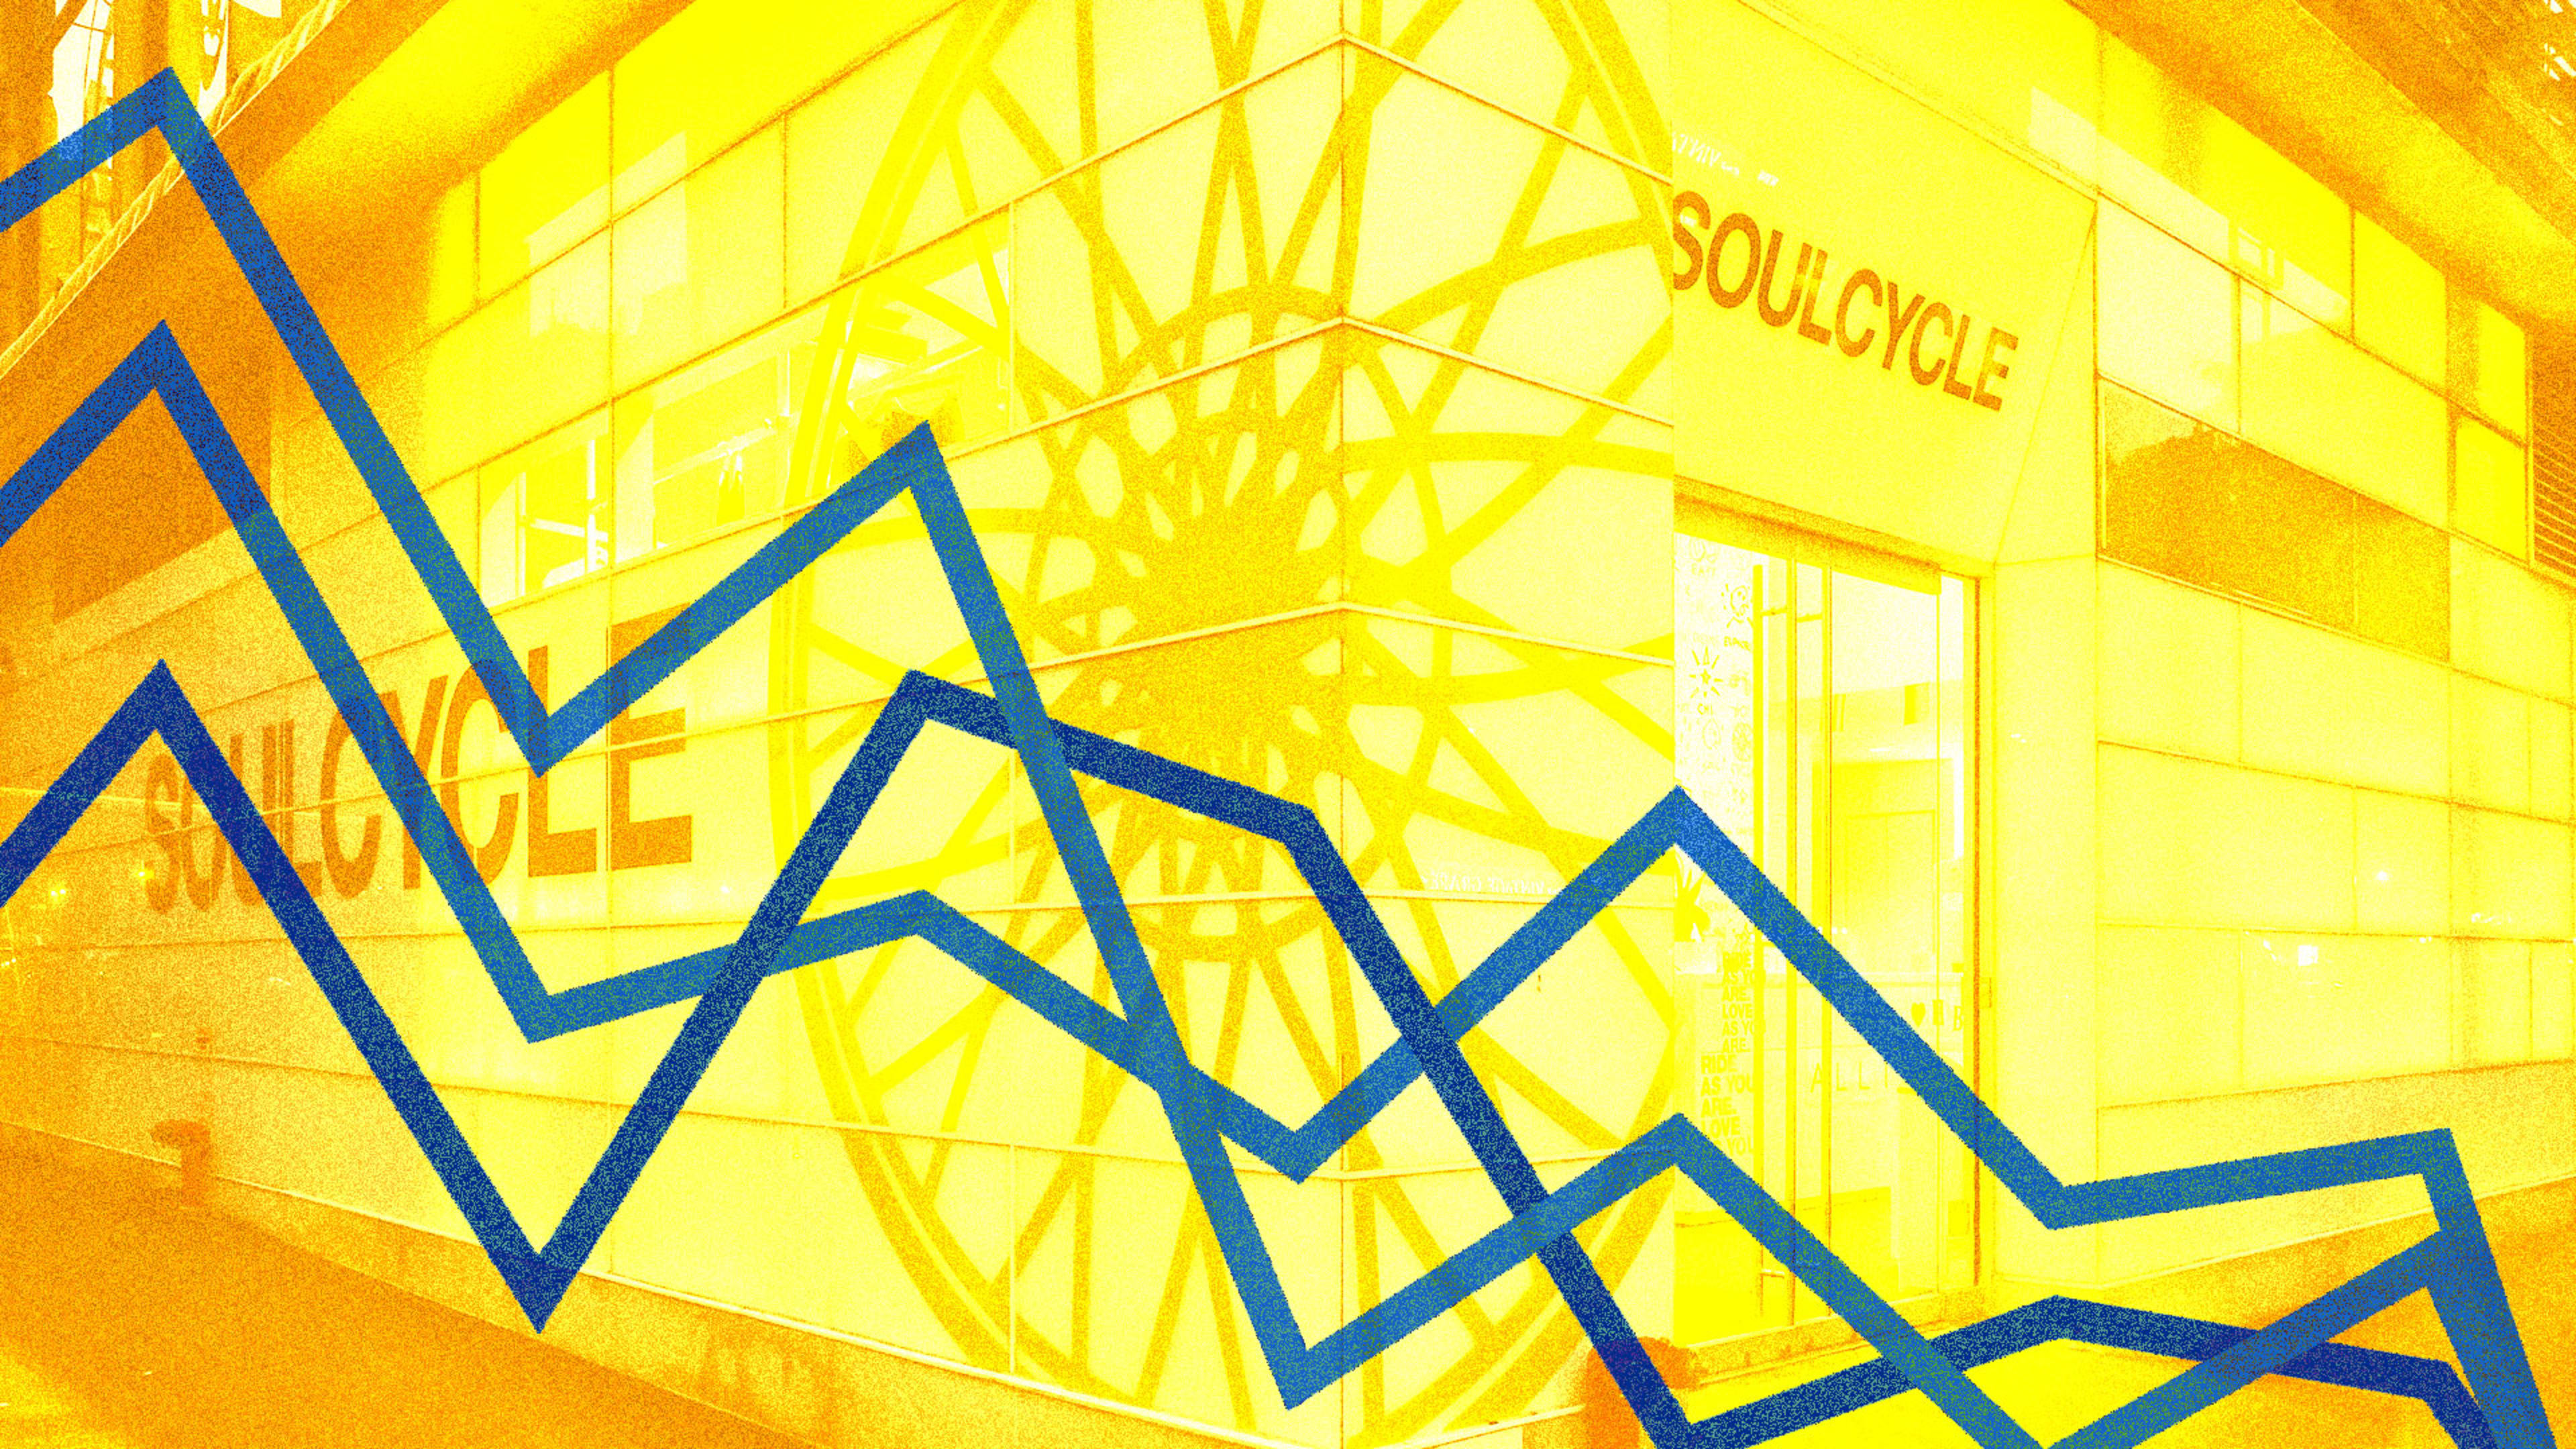 After boycotts over a Trump fundraiser, SoulCycle customer numbers plummet